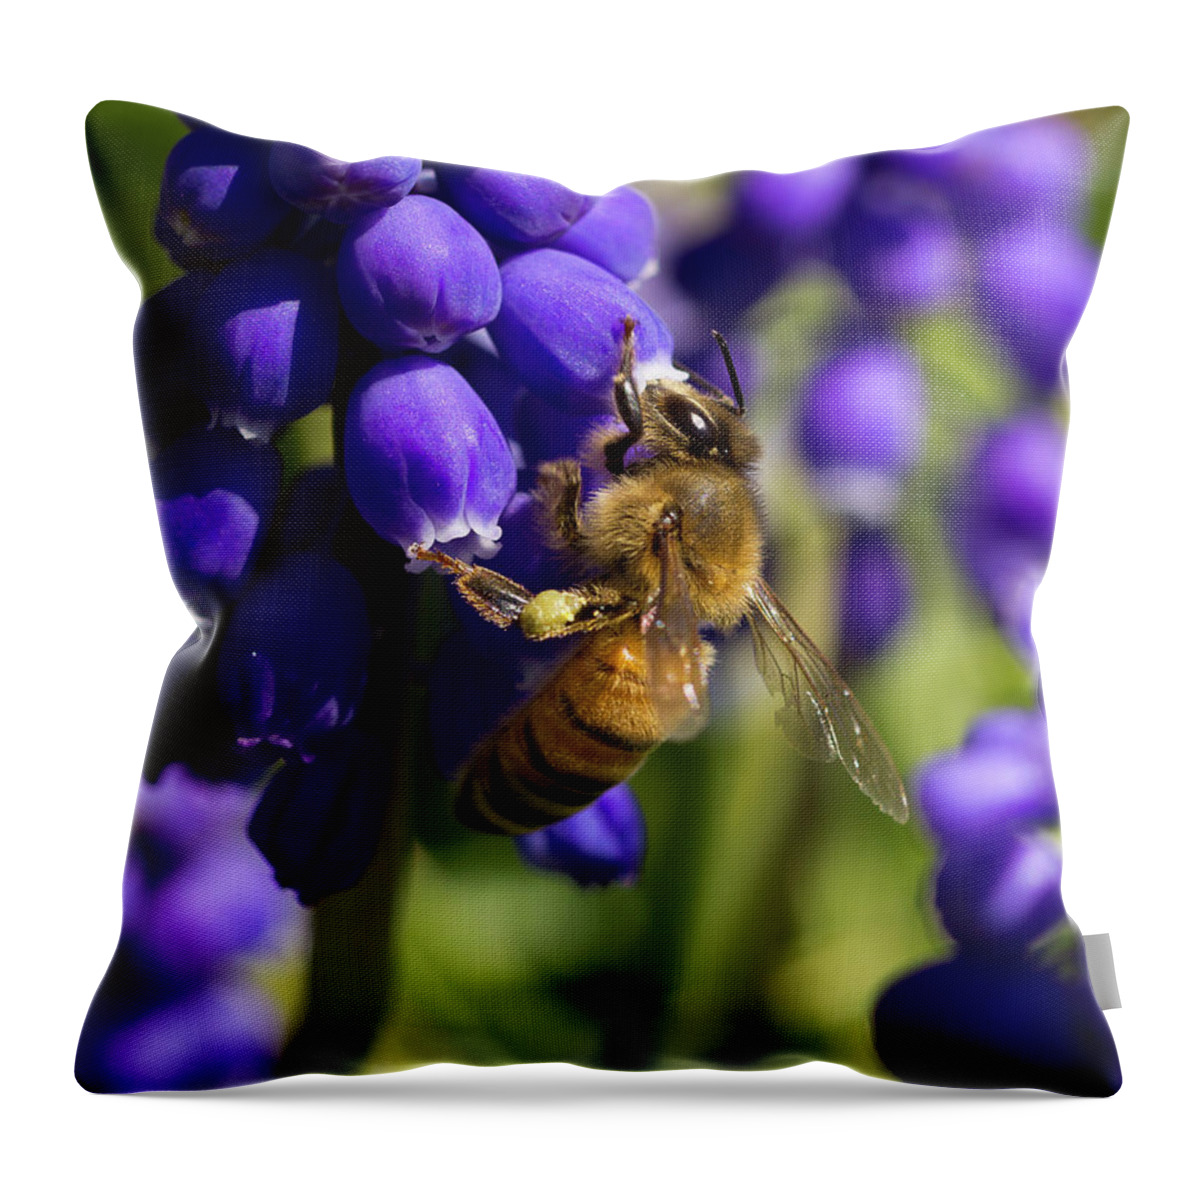 Bee Throw Pillow featuring the photograph Honey Bee by David Beechum